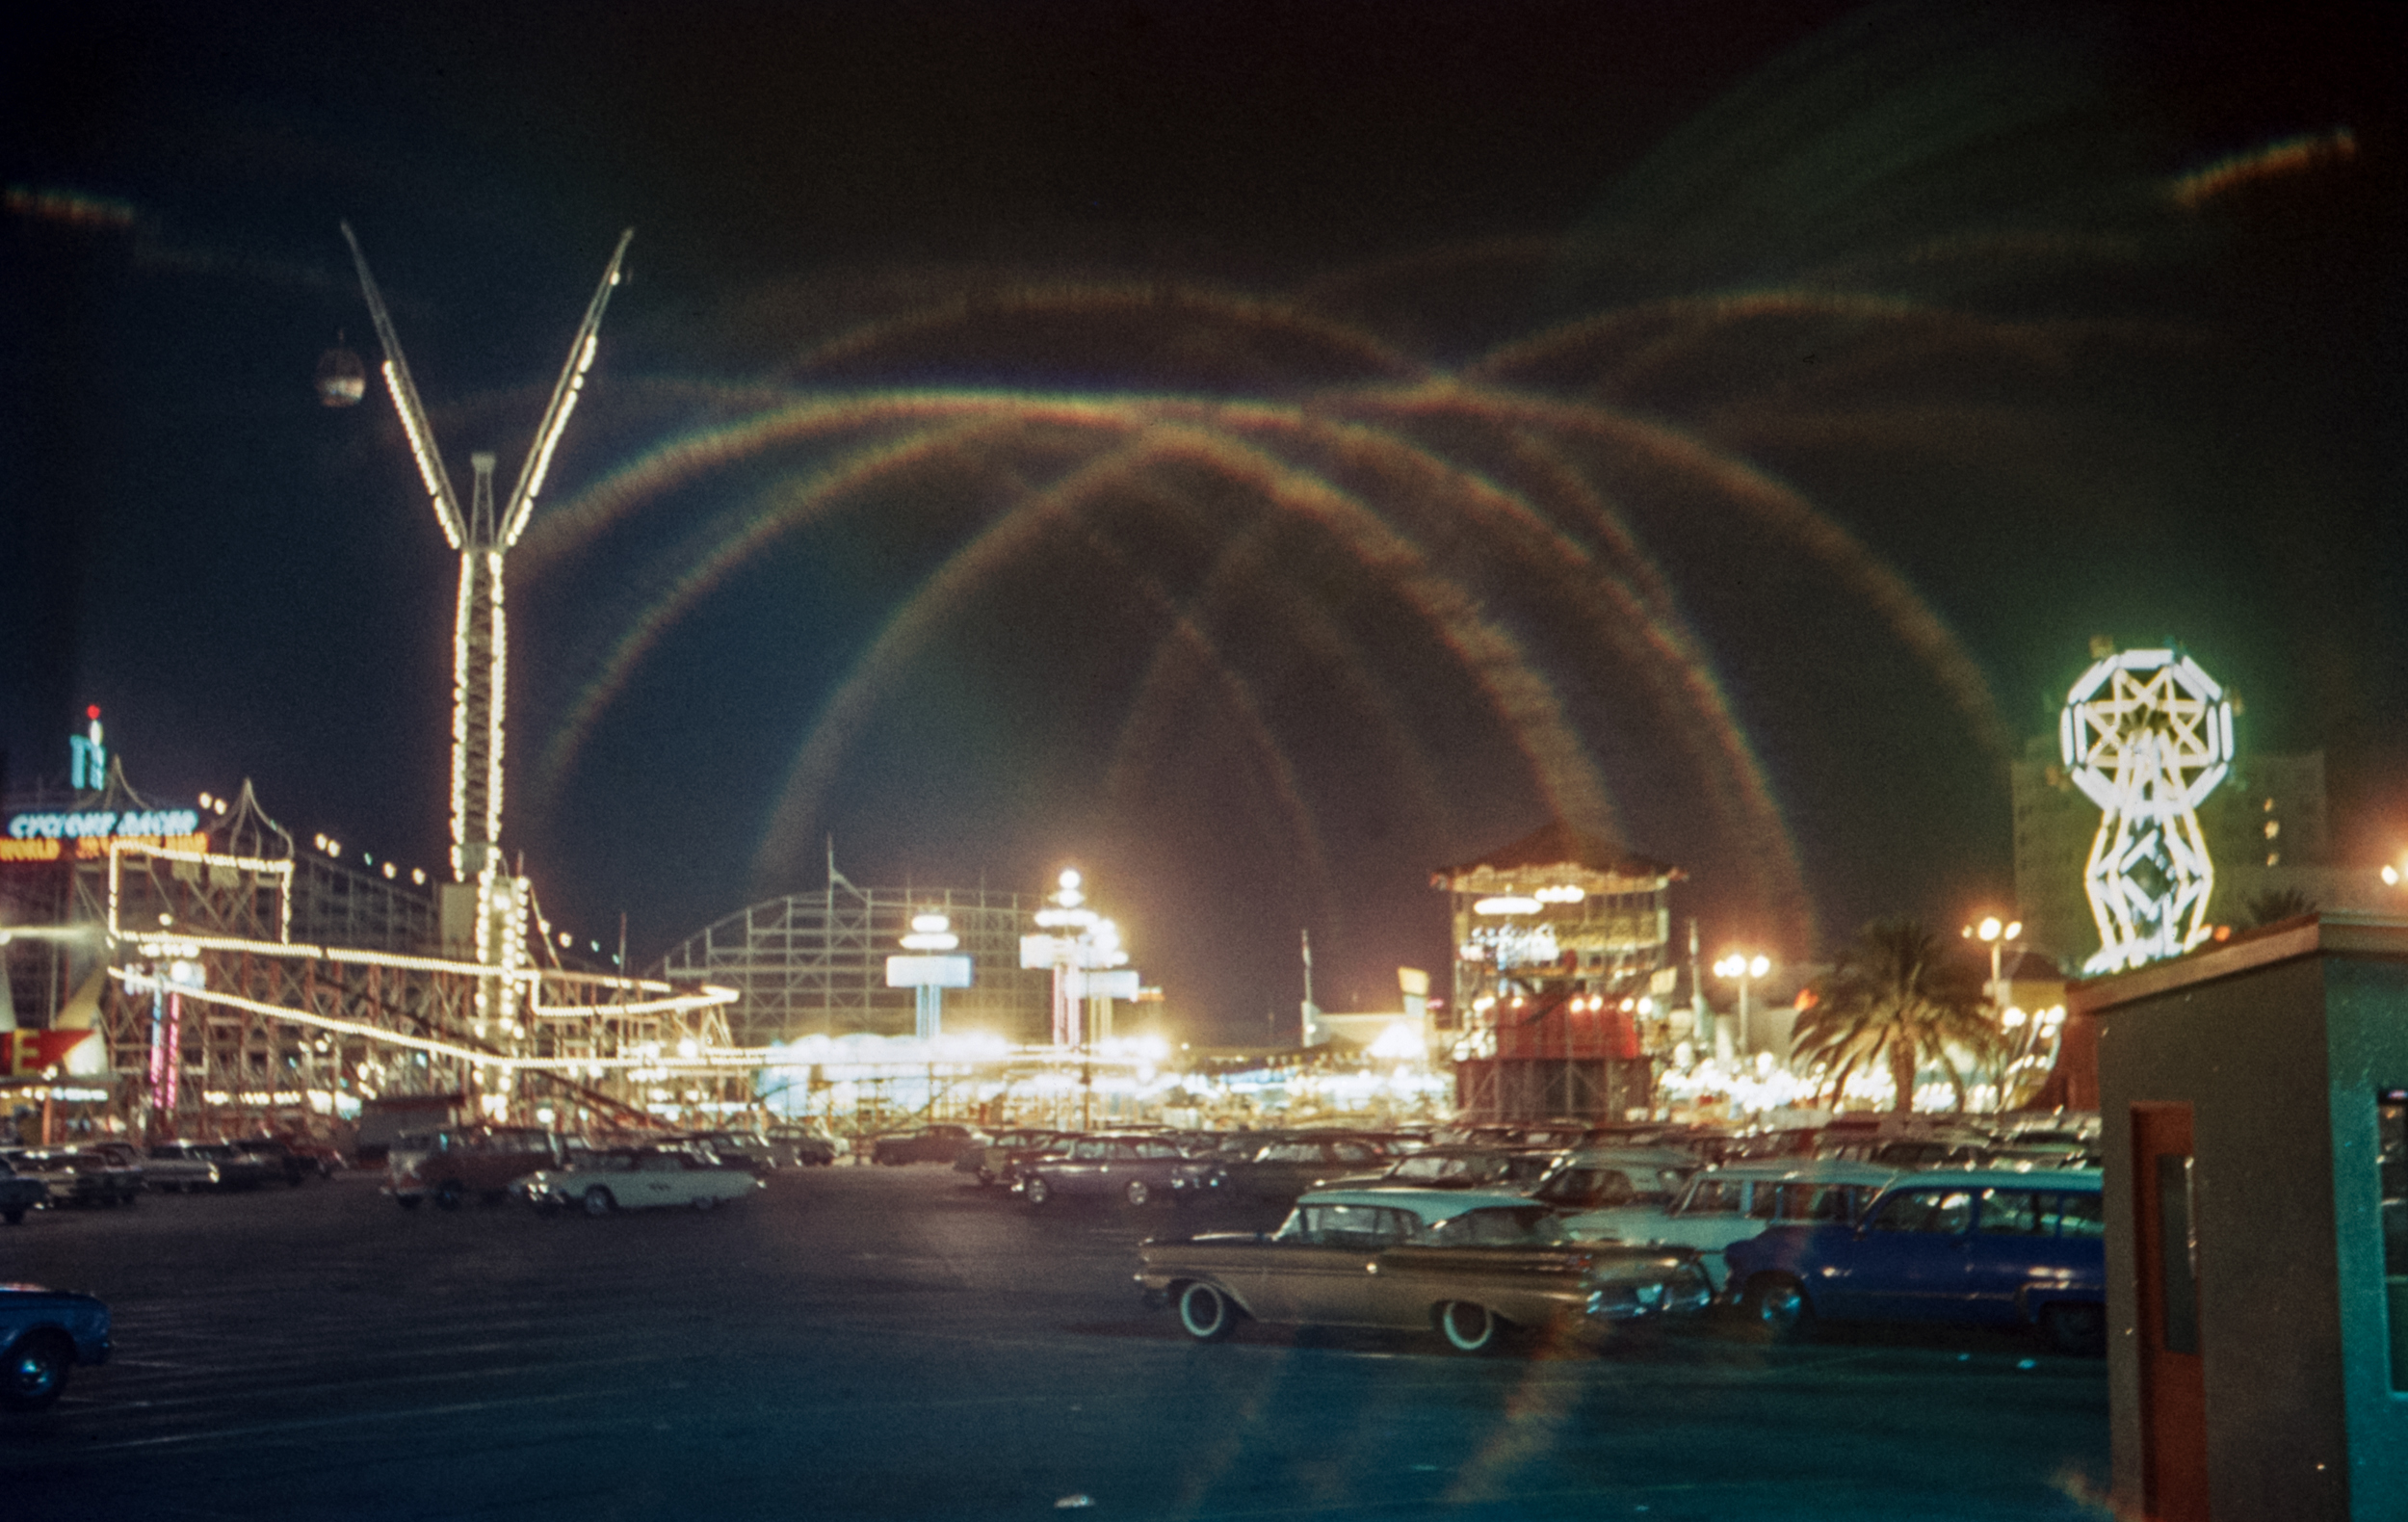 The Pike at Long Beach, California, August 1963. An old-style amusement park with wooden roller coaster "The Cyclone," closed in 1979. View full size.